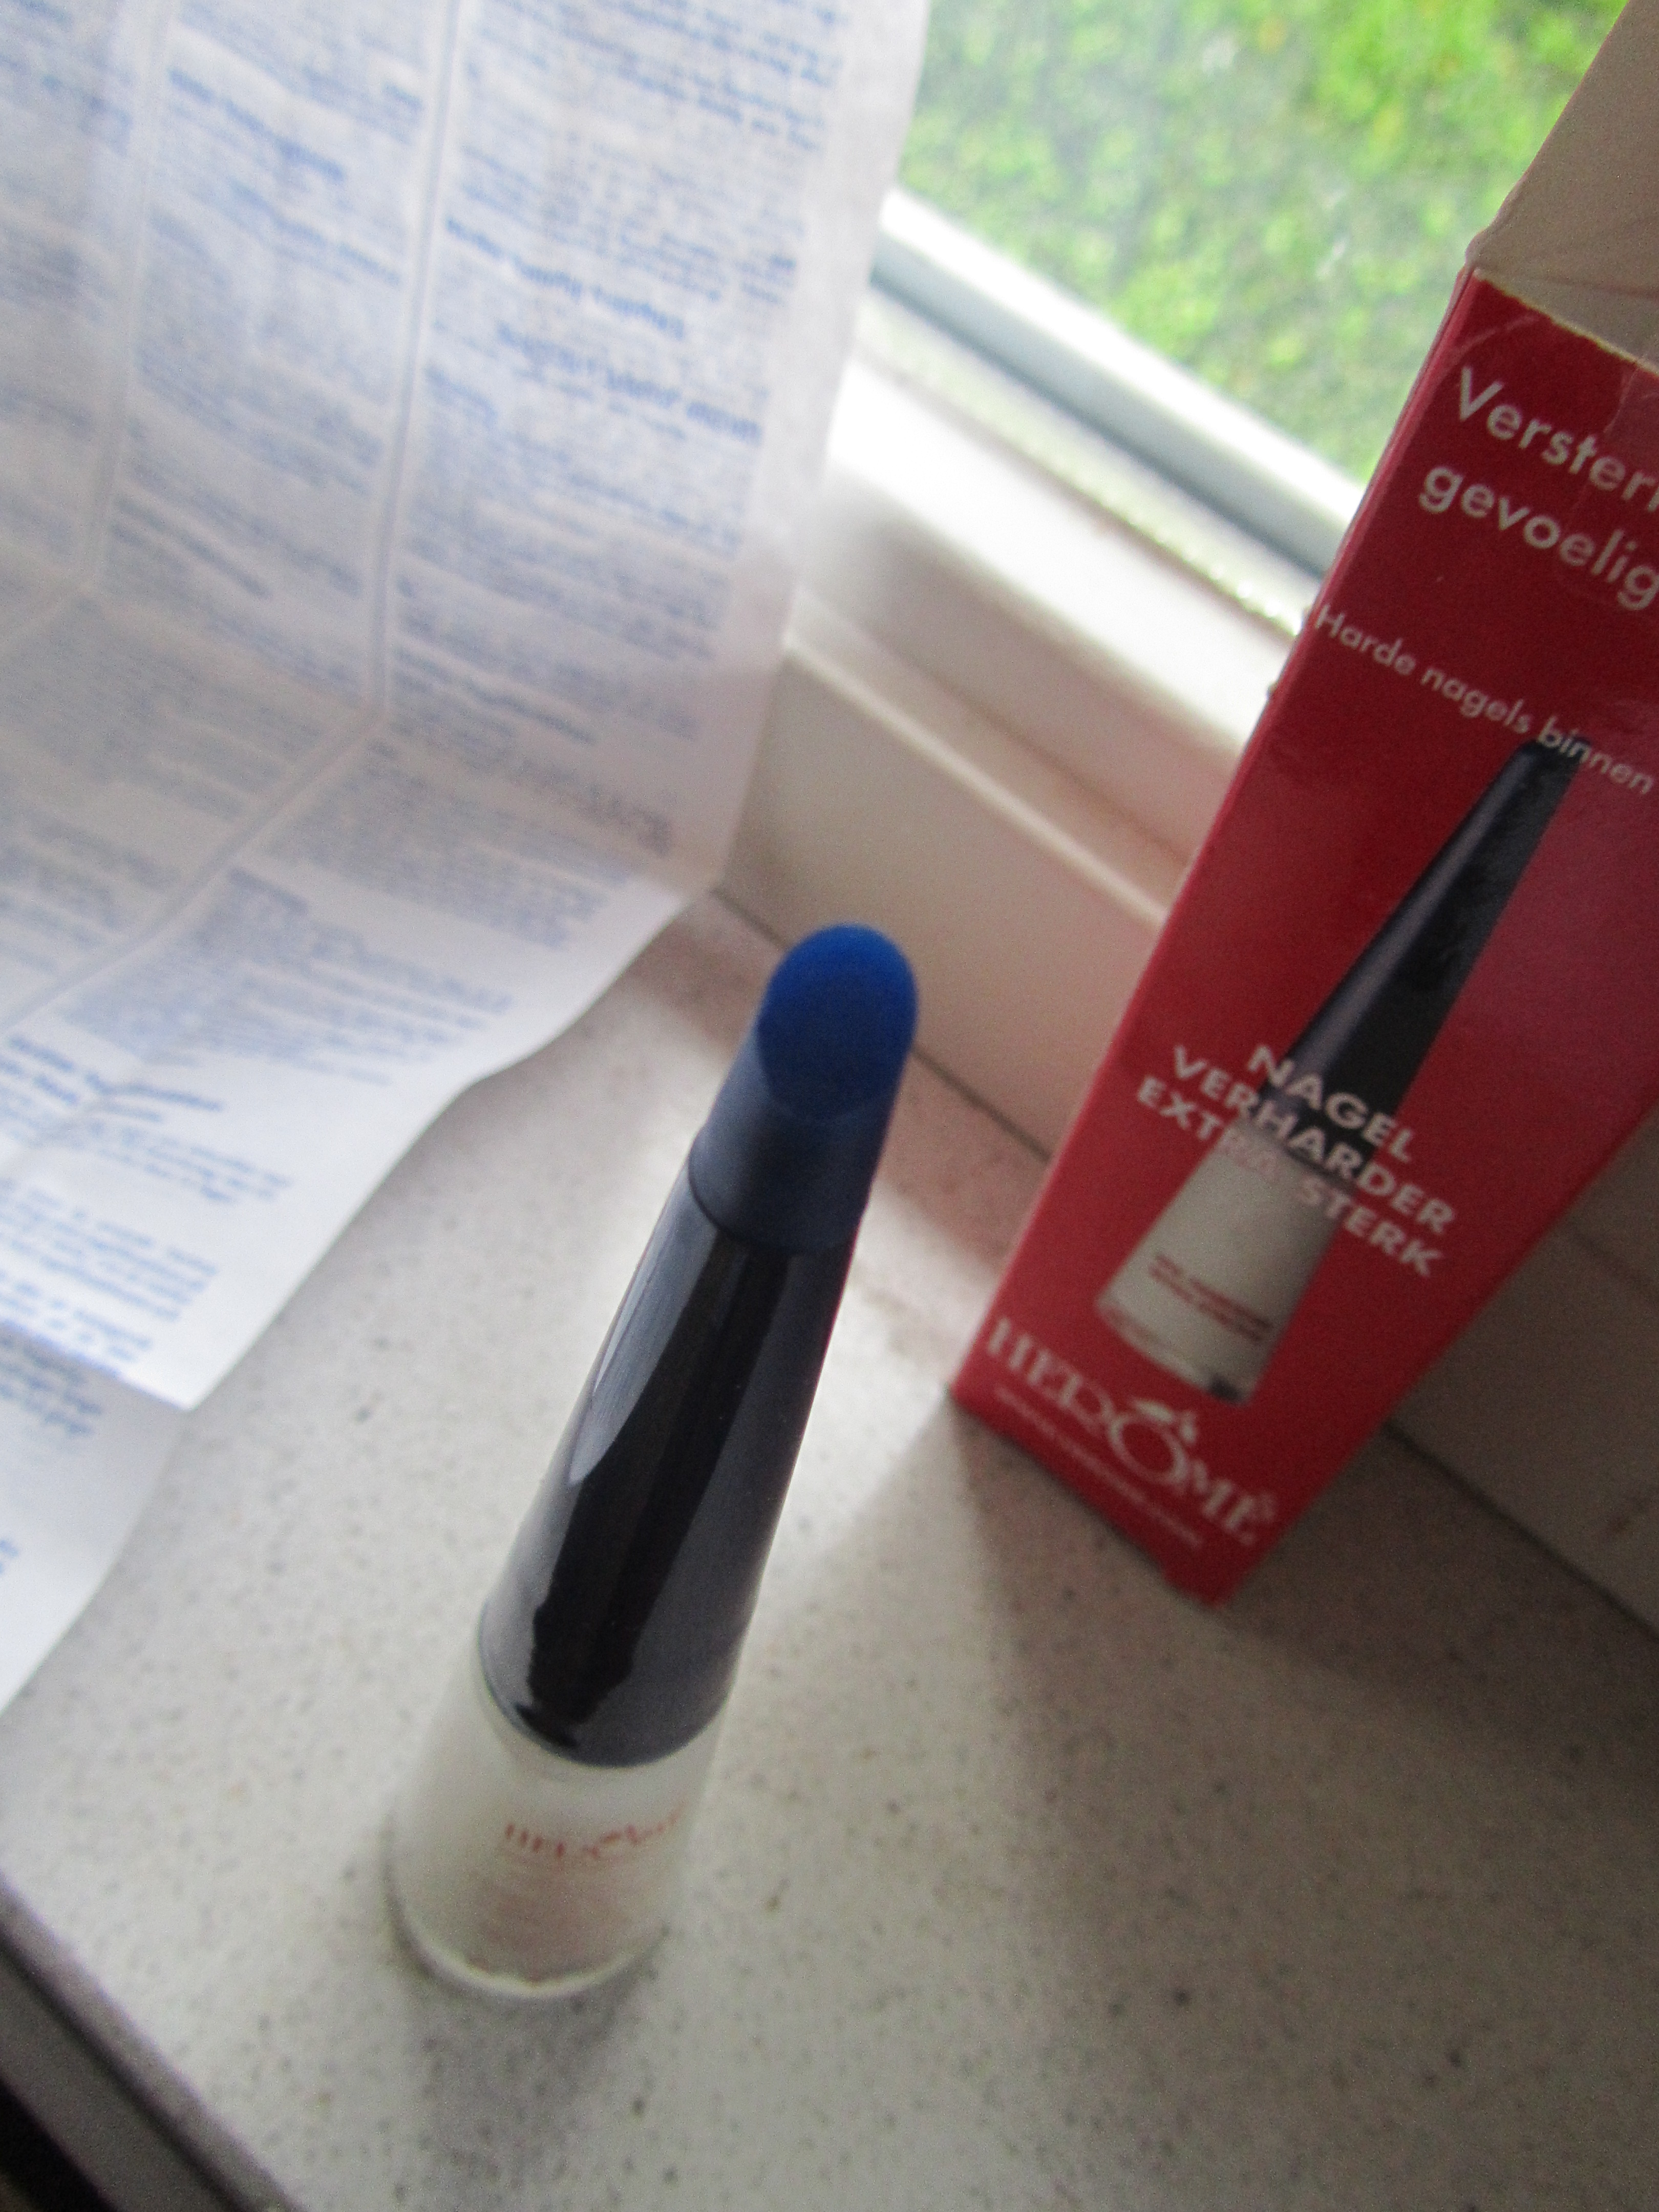 herome nail hardener extra strong review